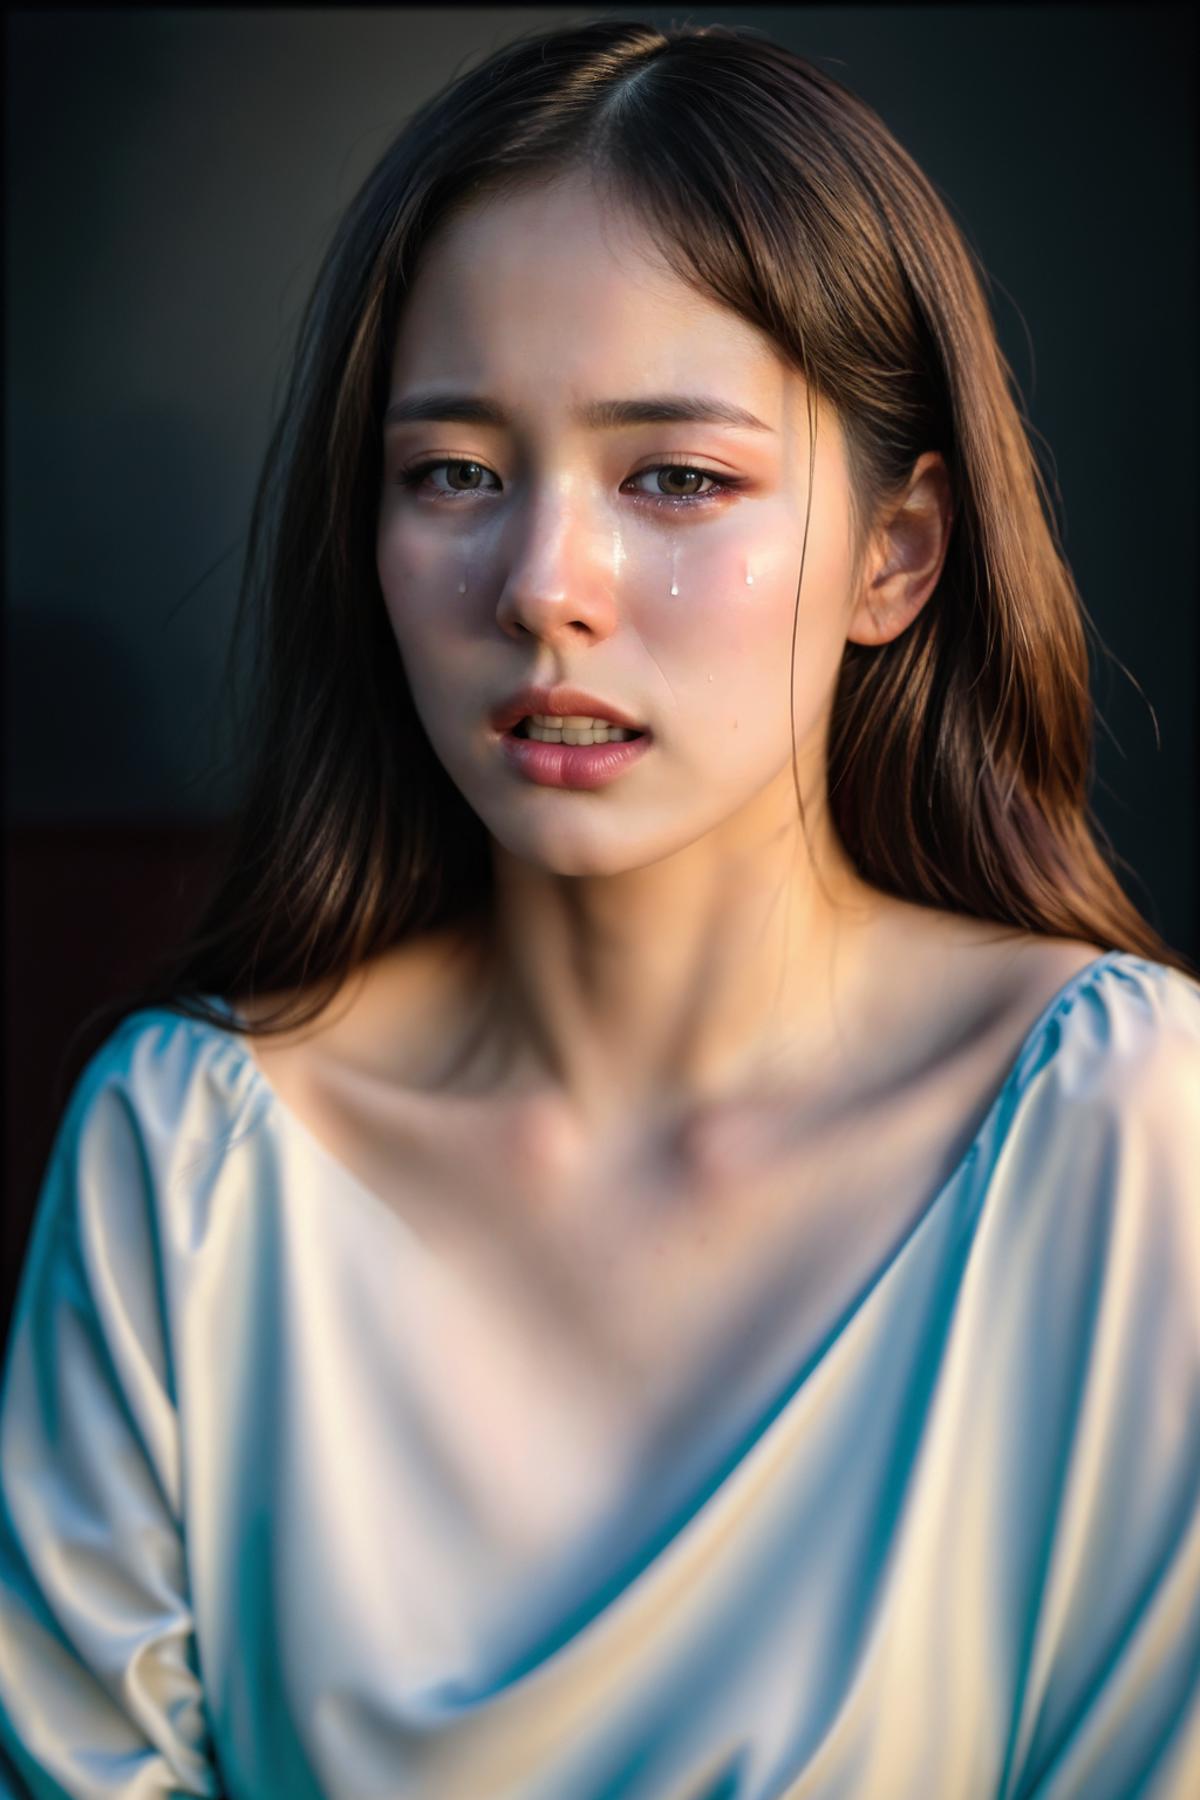 TQ - Realistic Crying | Style LoRA image by TracQuoc